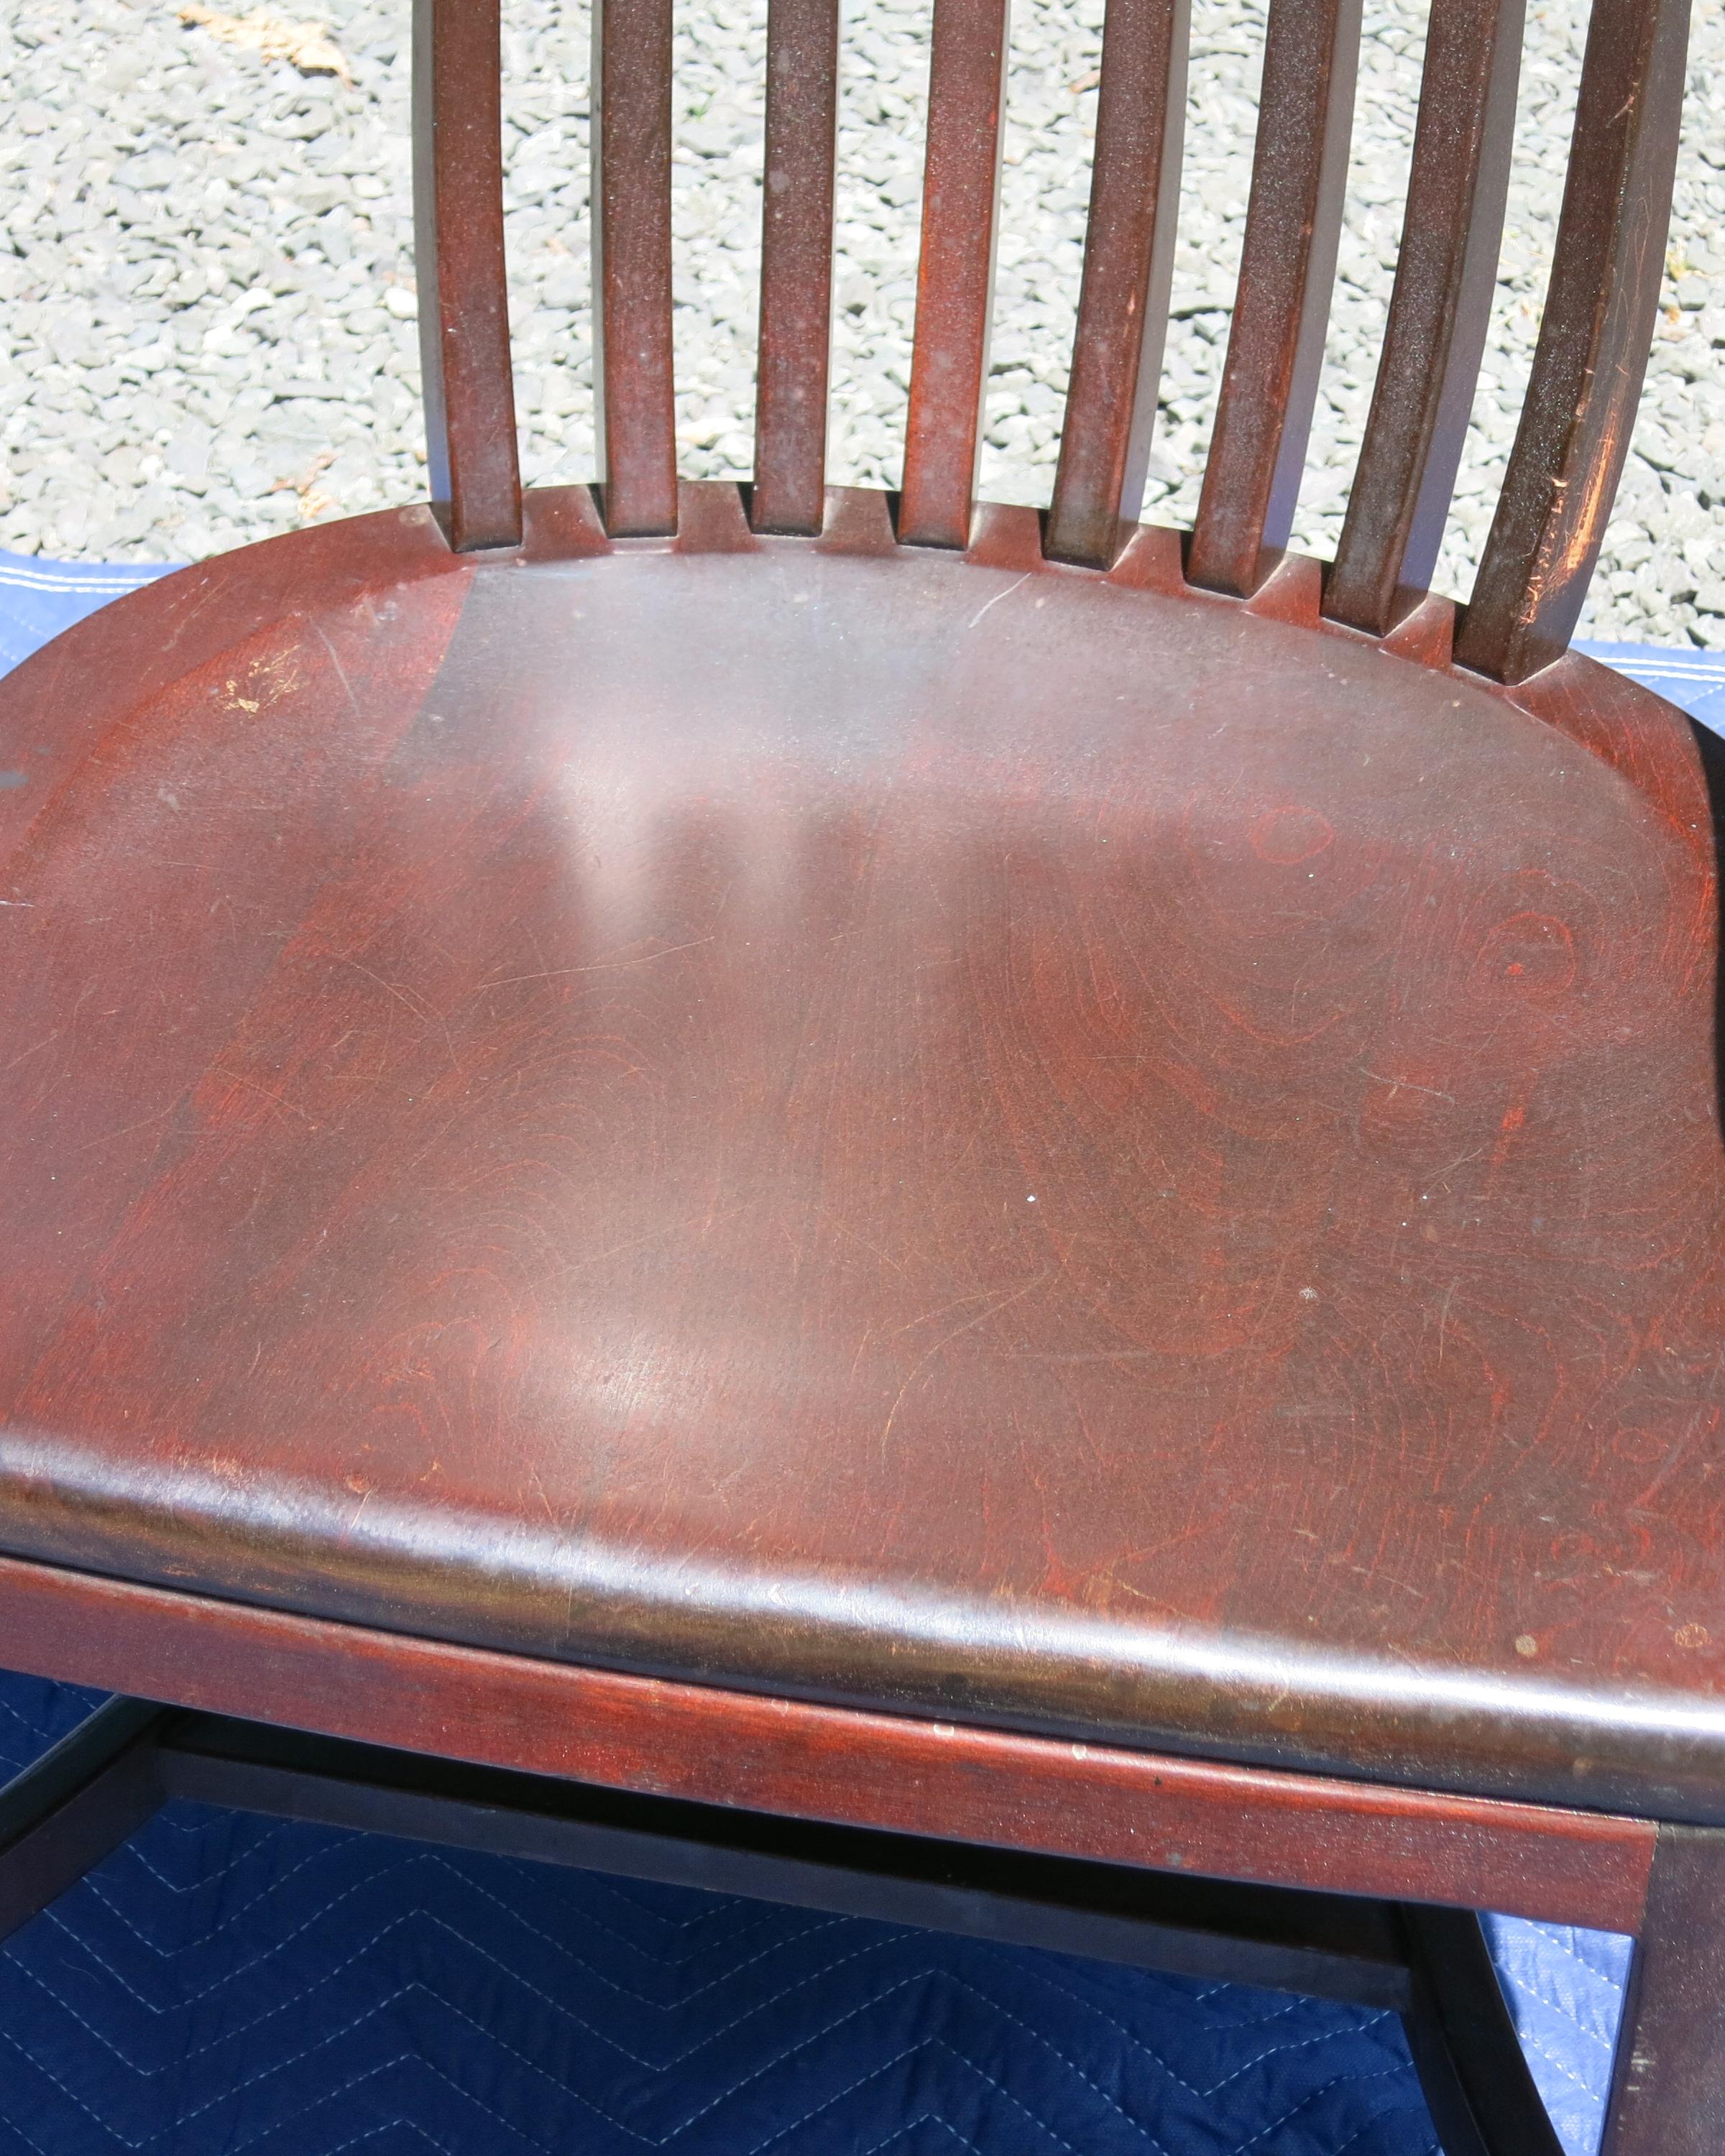 Bankers chair, with red finish possibly mahogany. Wear to finish at armrests. Older chair finish worn. 25